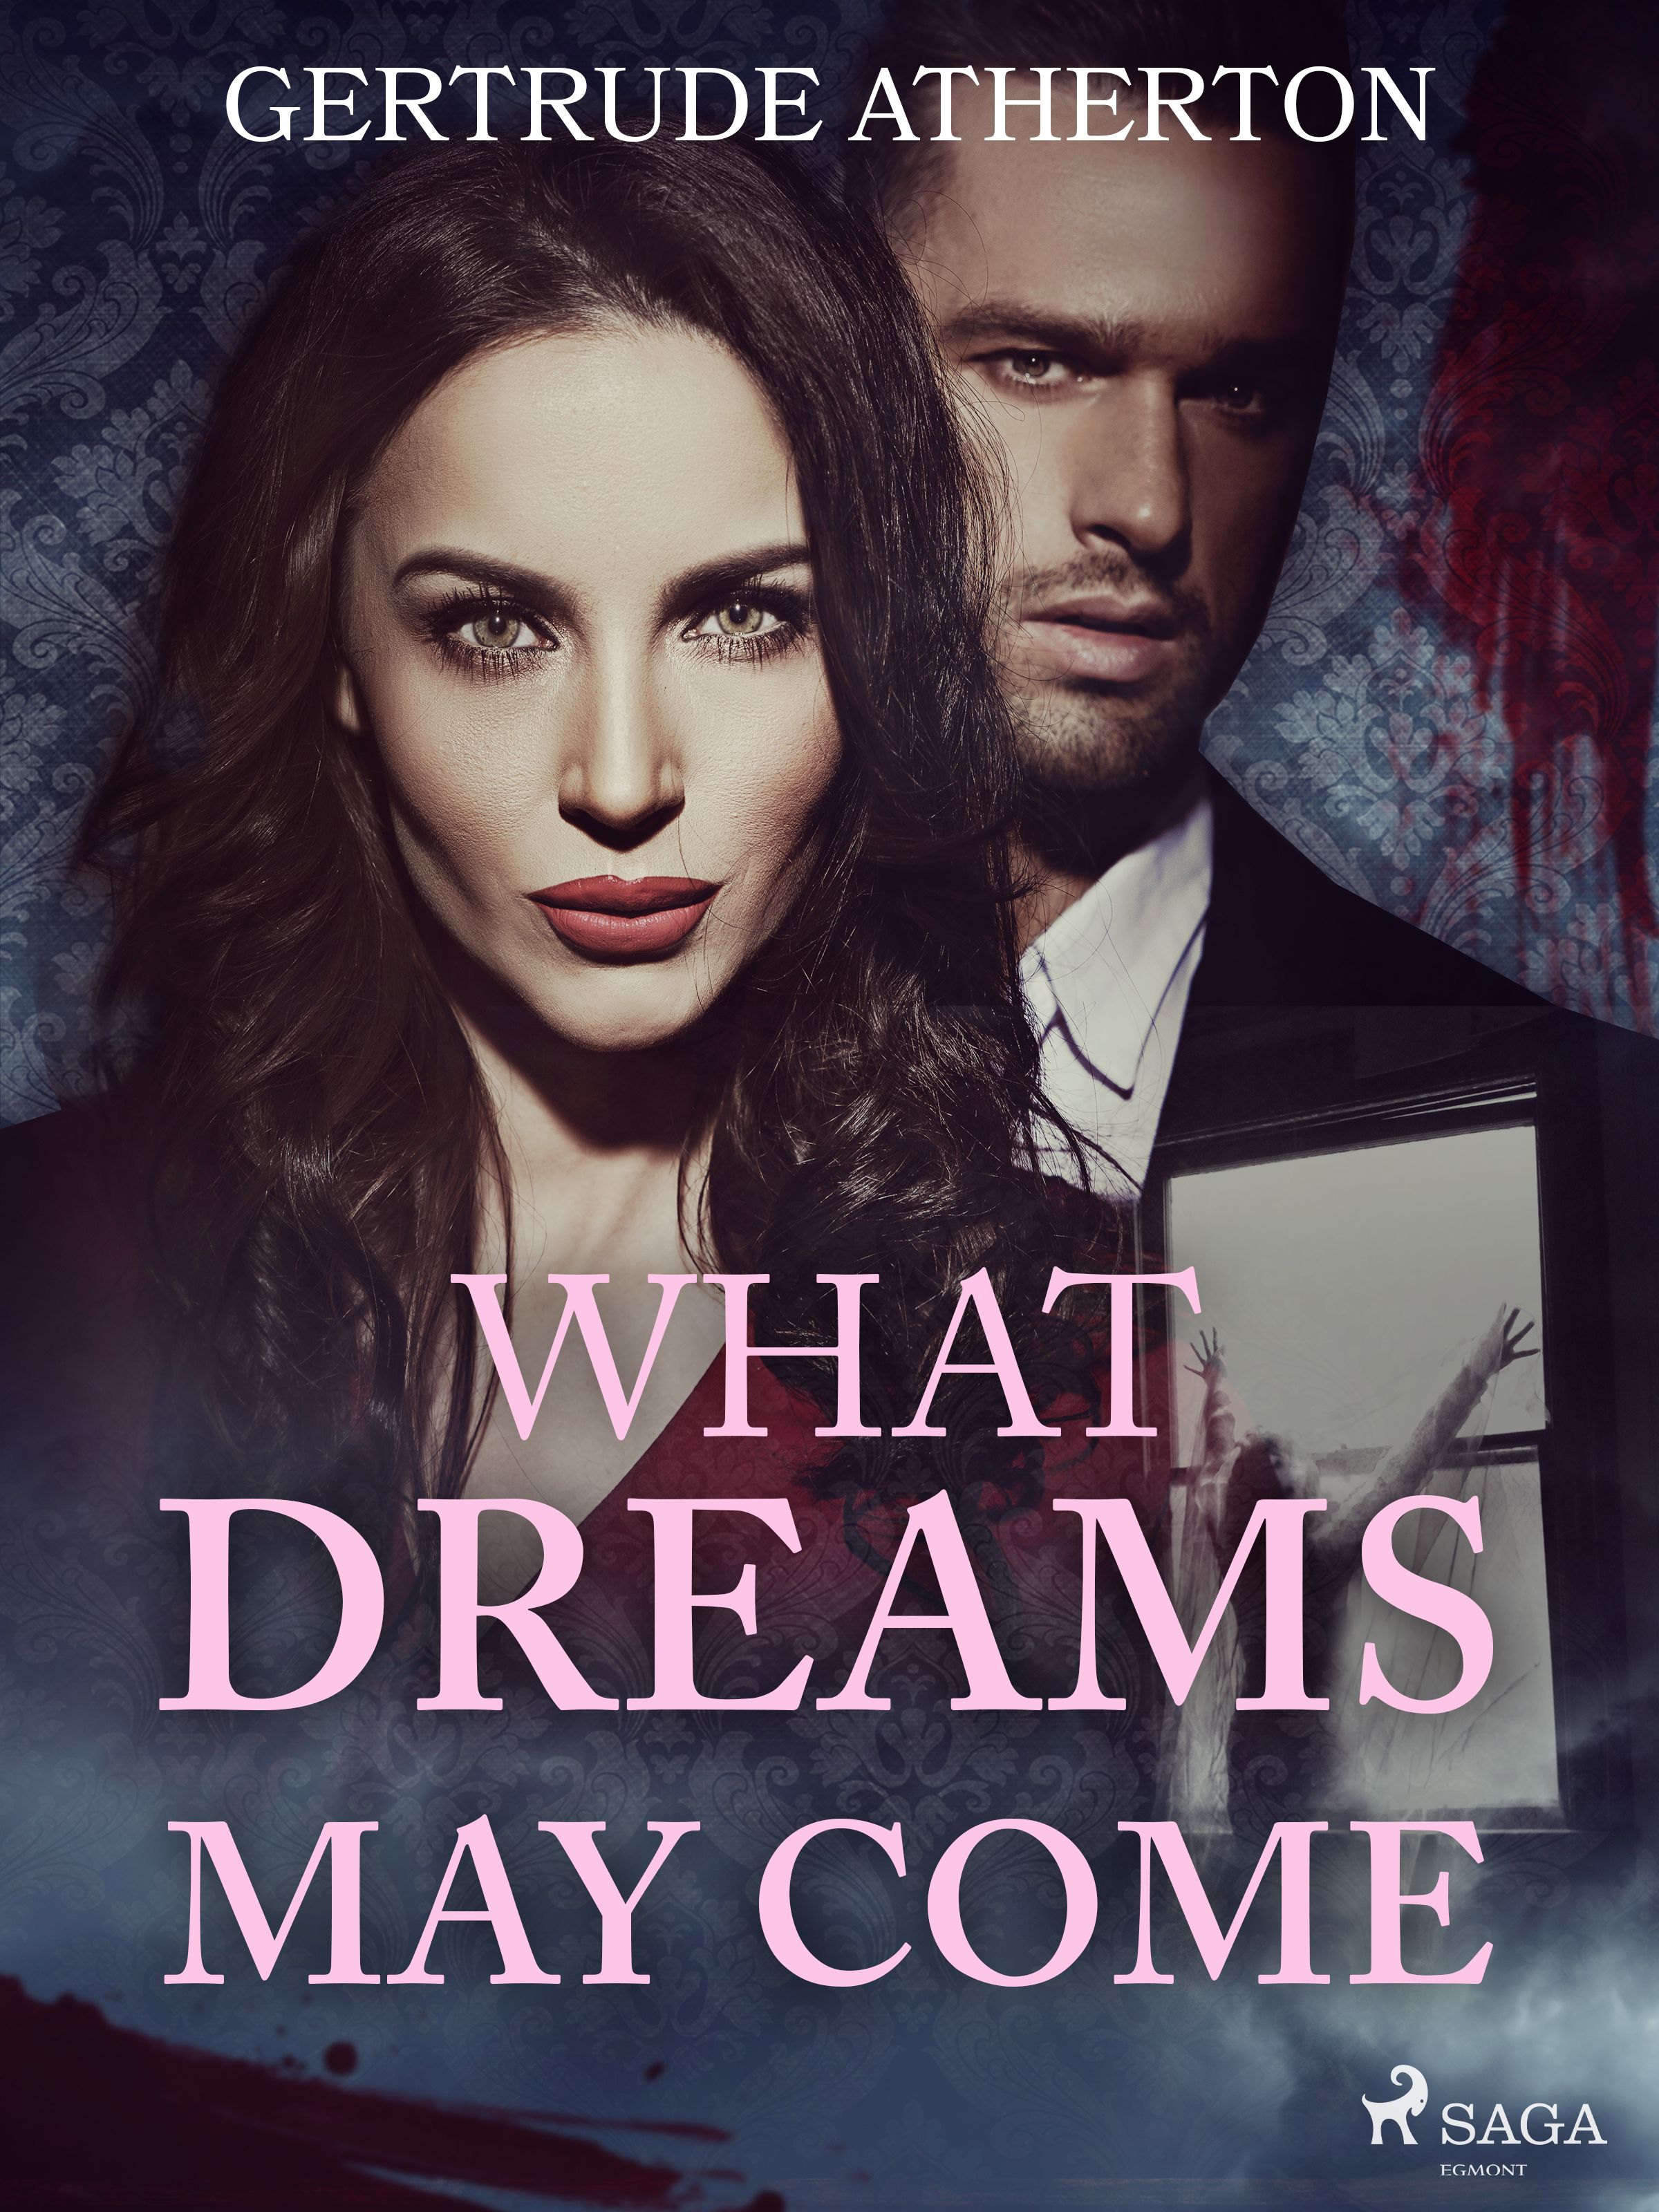 What Dreams May Come, eBook by Gertrude Atherton